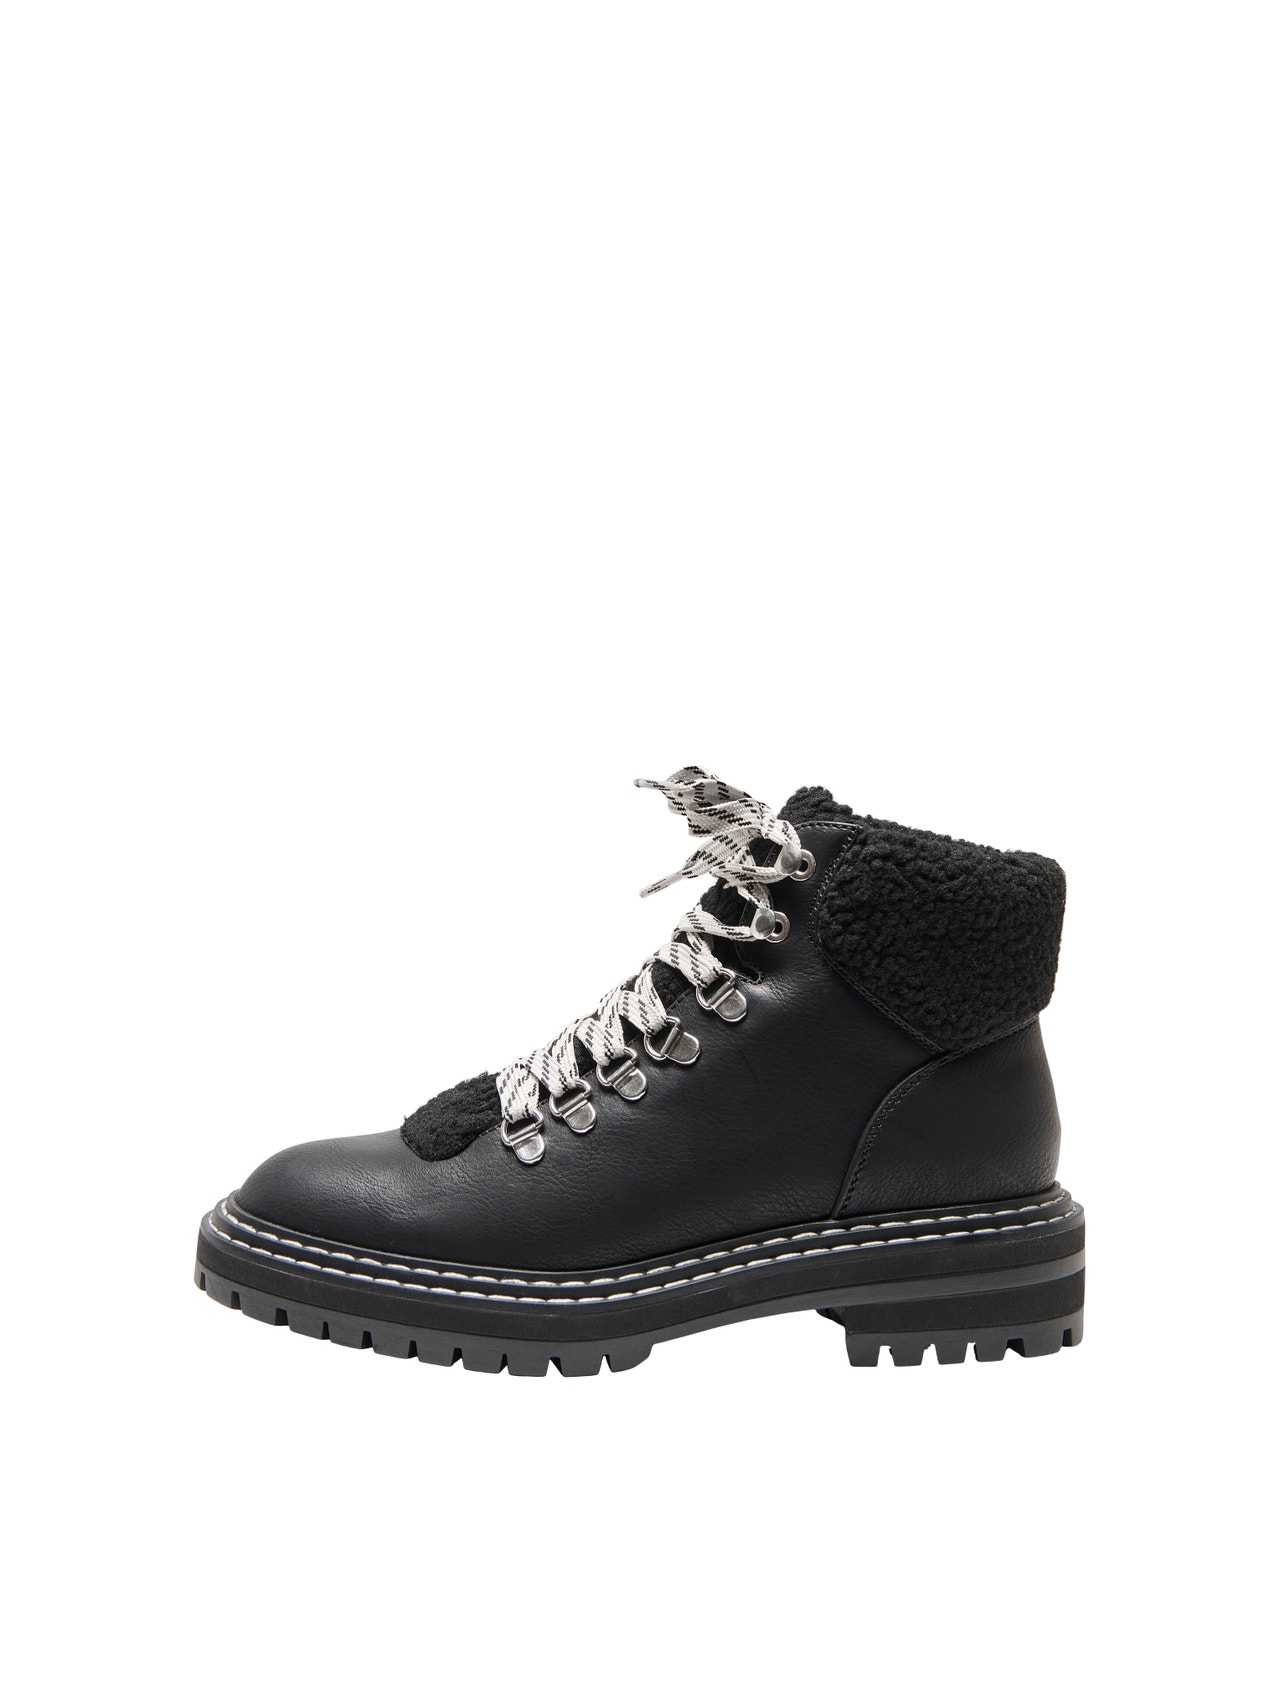 ONLY Boots -Black - 15271997